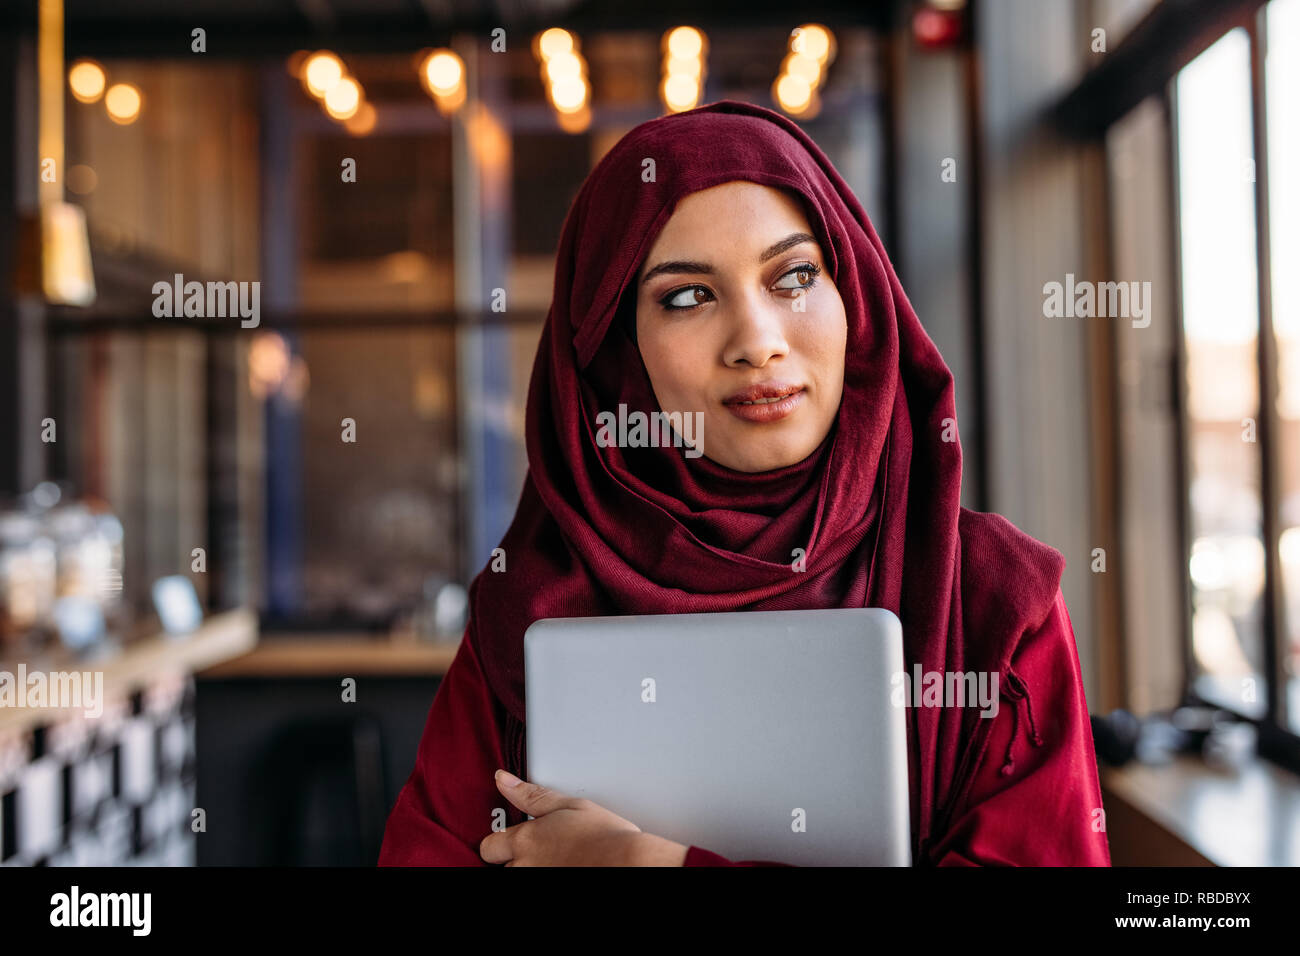 businesswoman in hijab with laptop at cafe looking away. Young muslim woman in hijab standing at restaurant. Stock Photo